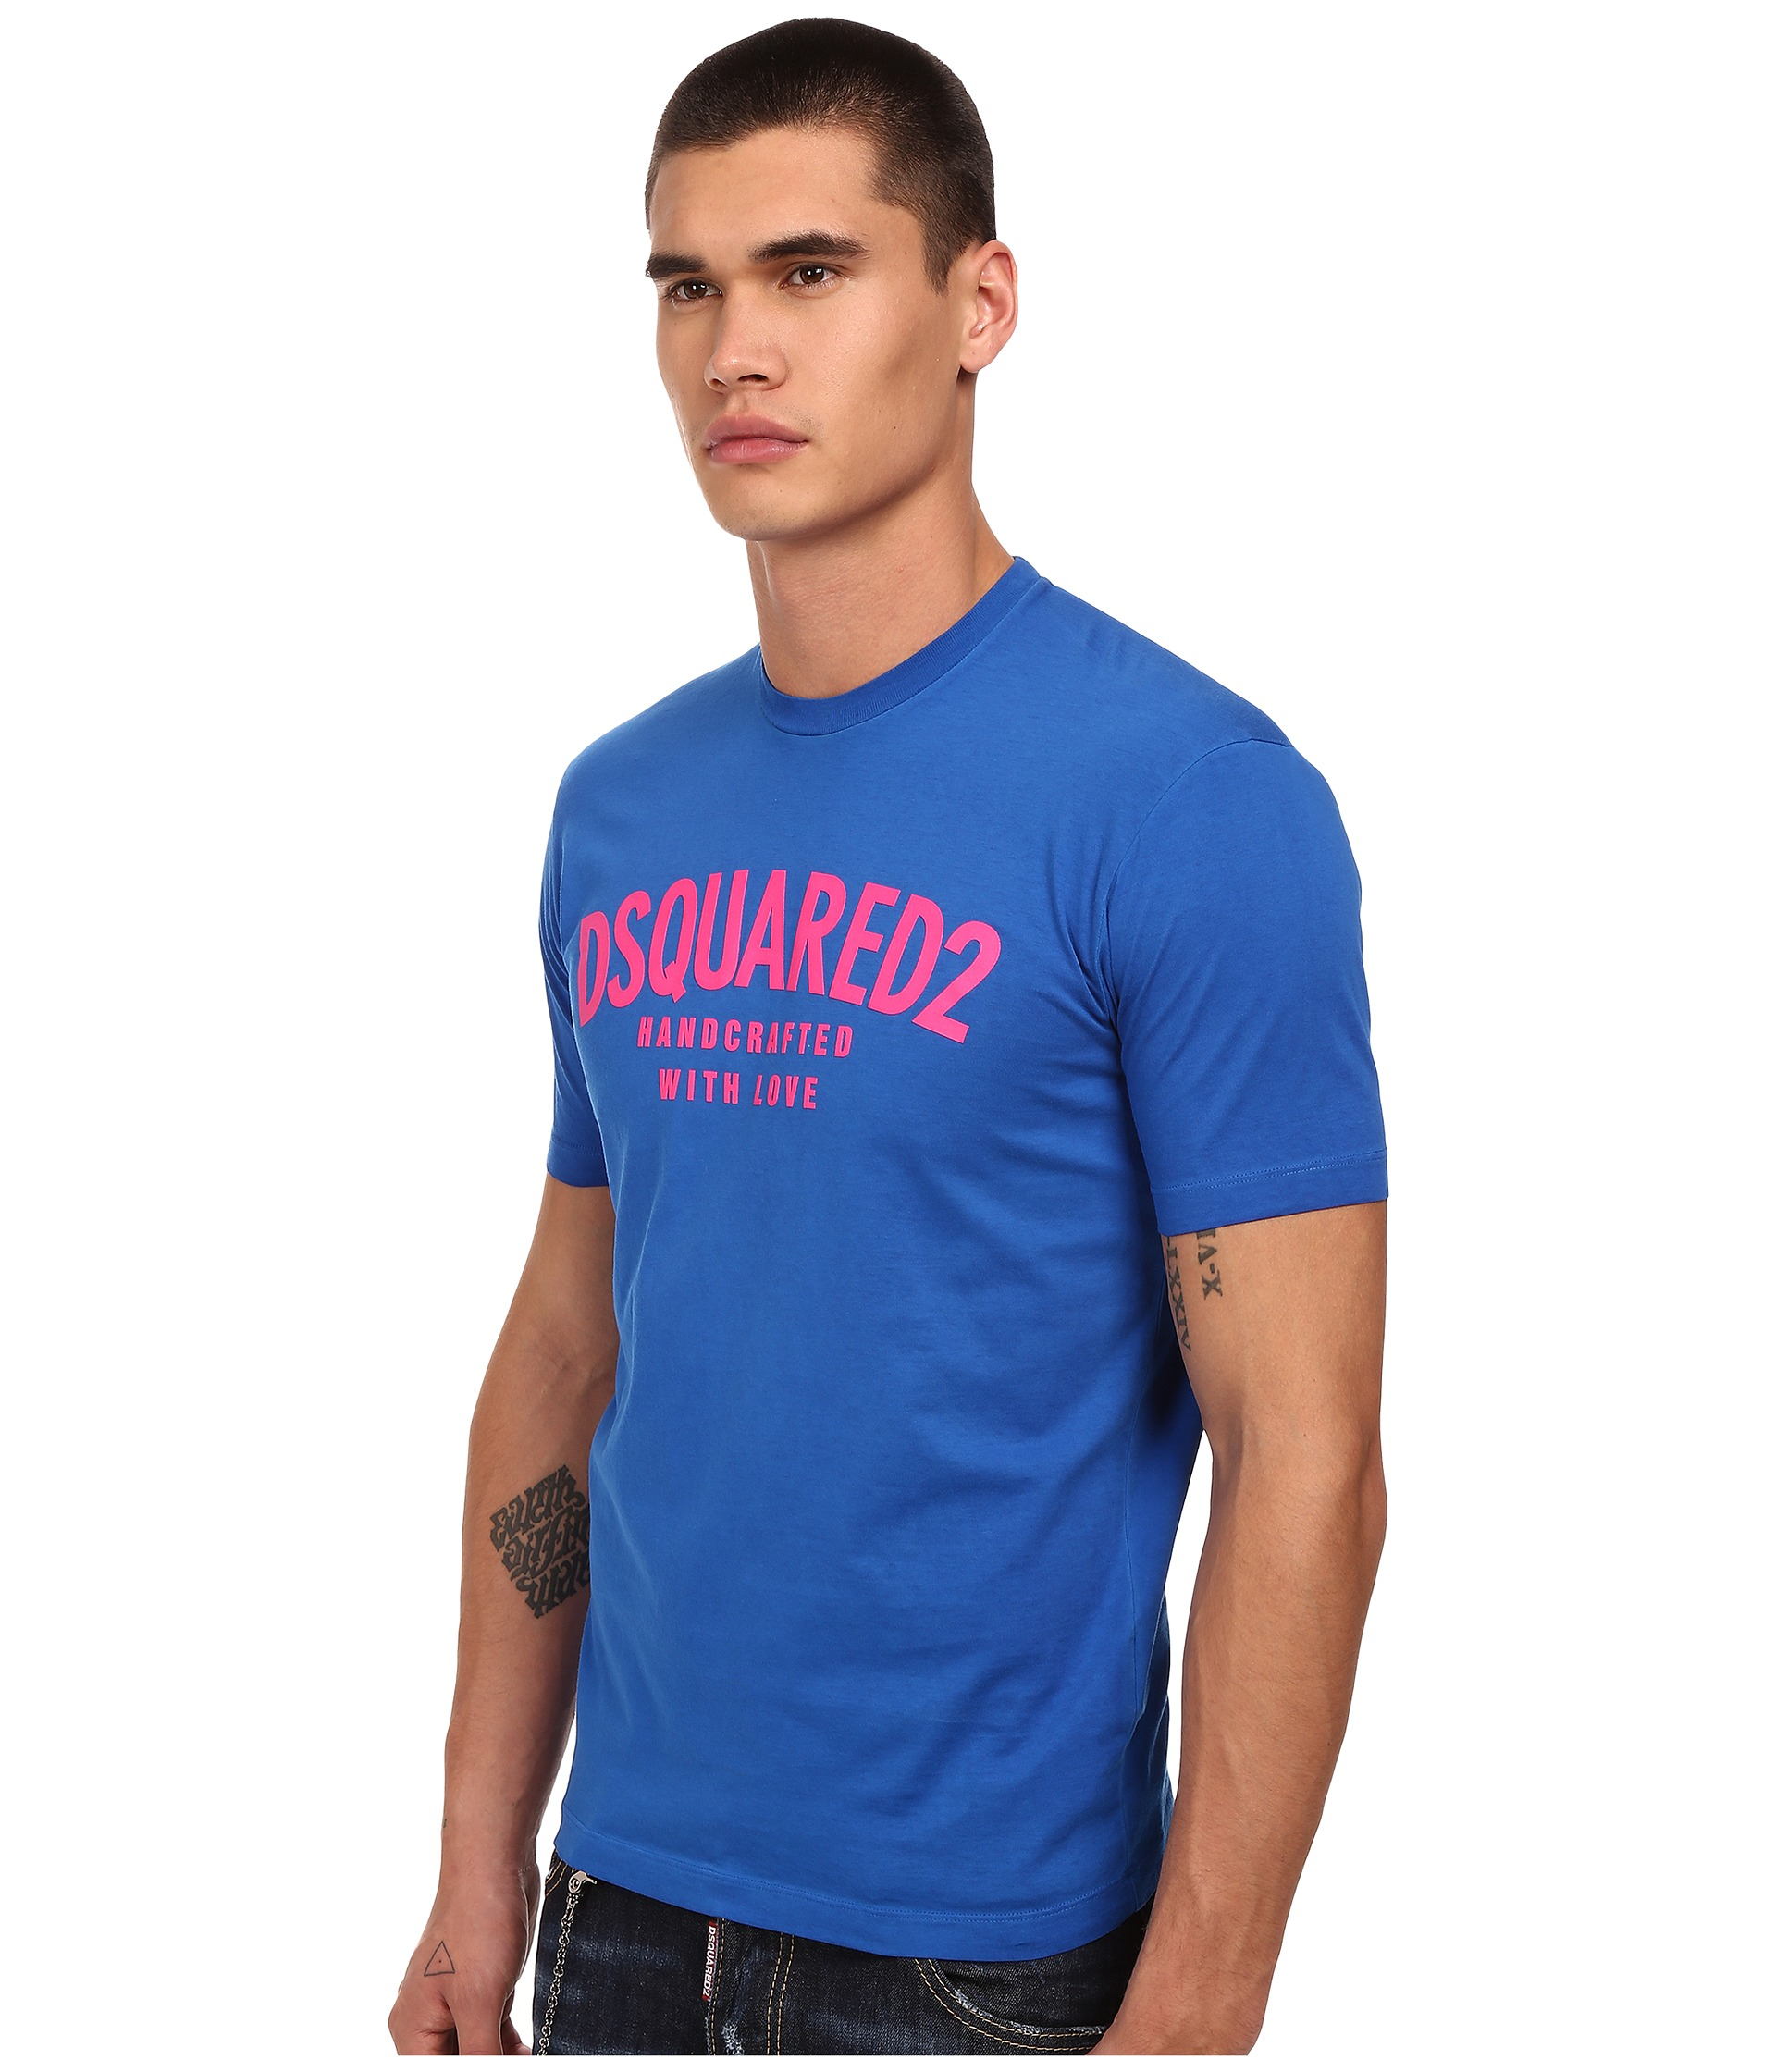 DSquared² Handcrafted With Love T-shirt 